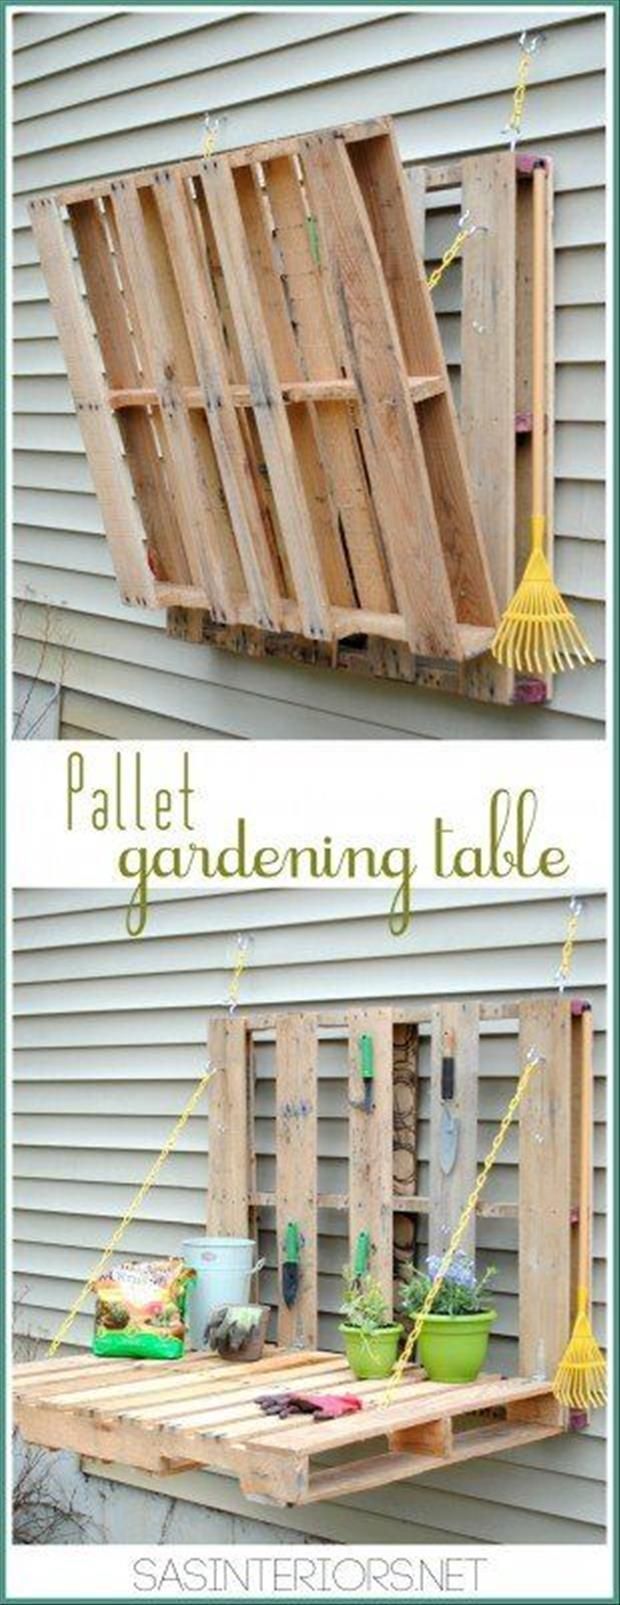 Amazing Uses For Old Pallets – 25 Pics